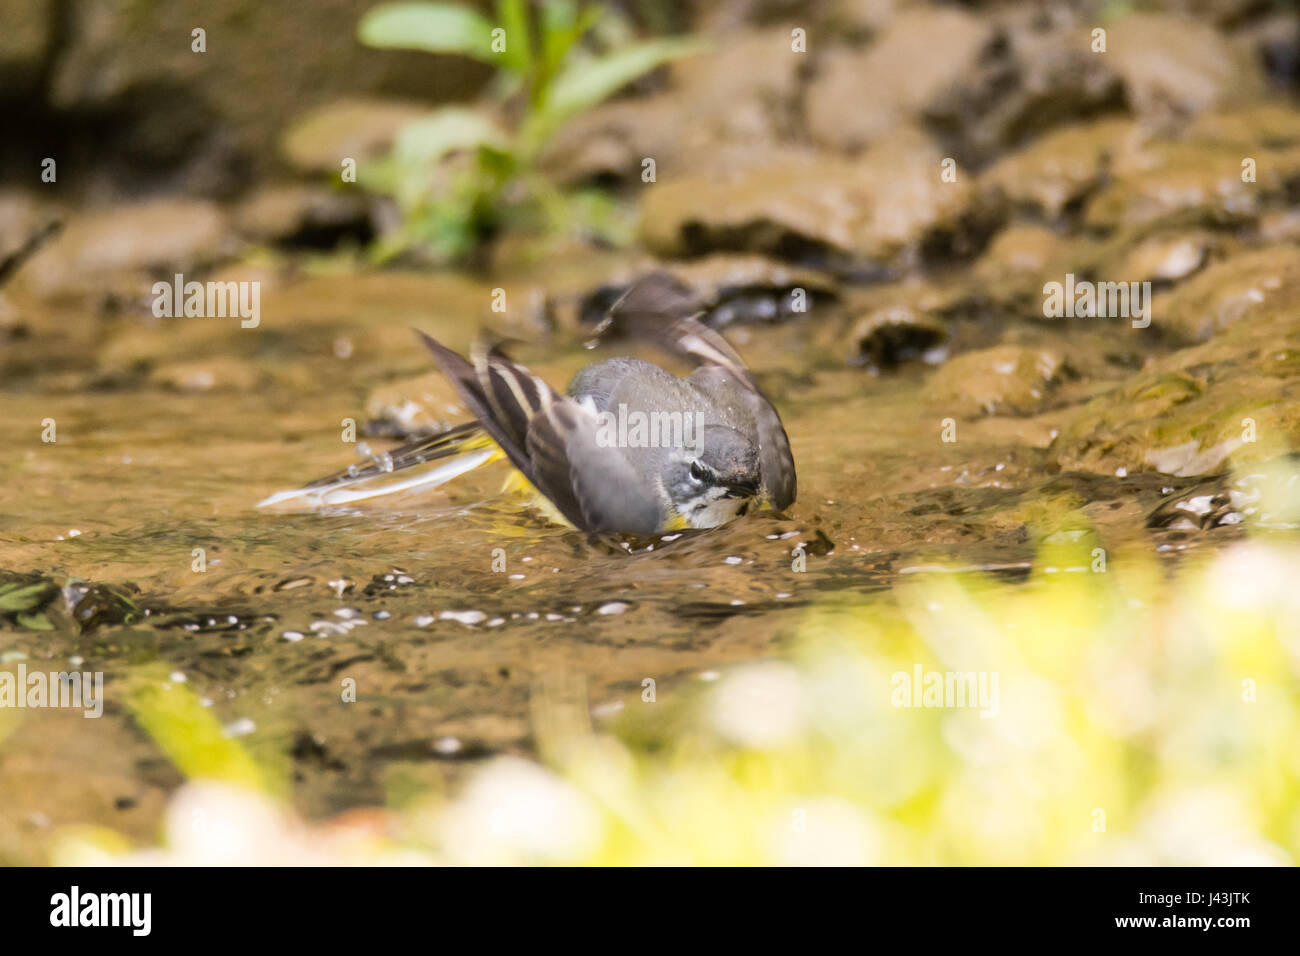 Grey wagtail (Motacilla cinerea) bathing in stream. Colourful female bird in the family Motacillidae, taking a bath in shallow water Stock Photo